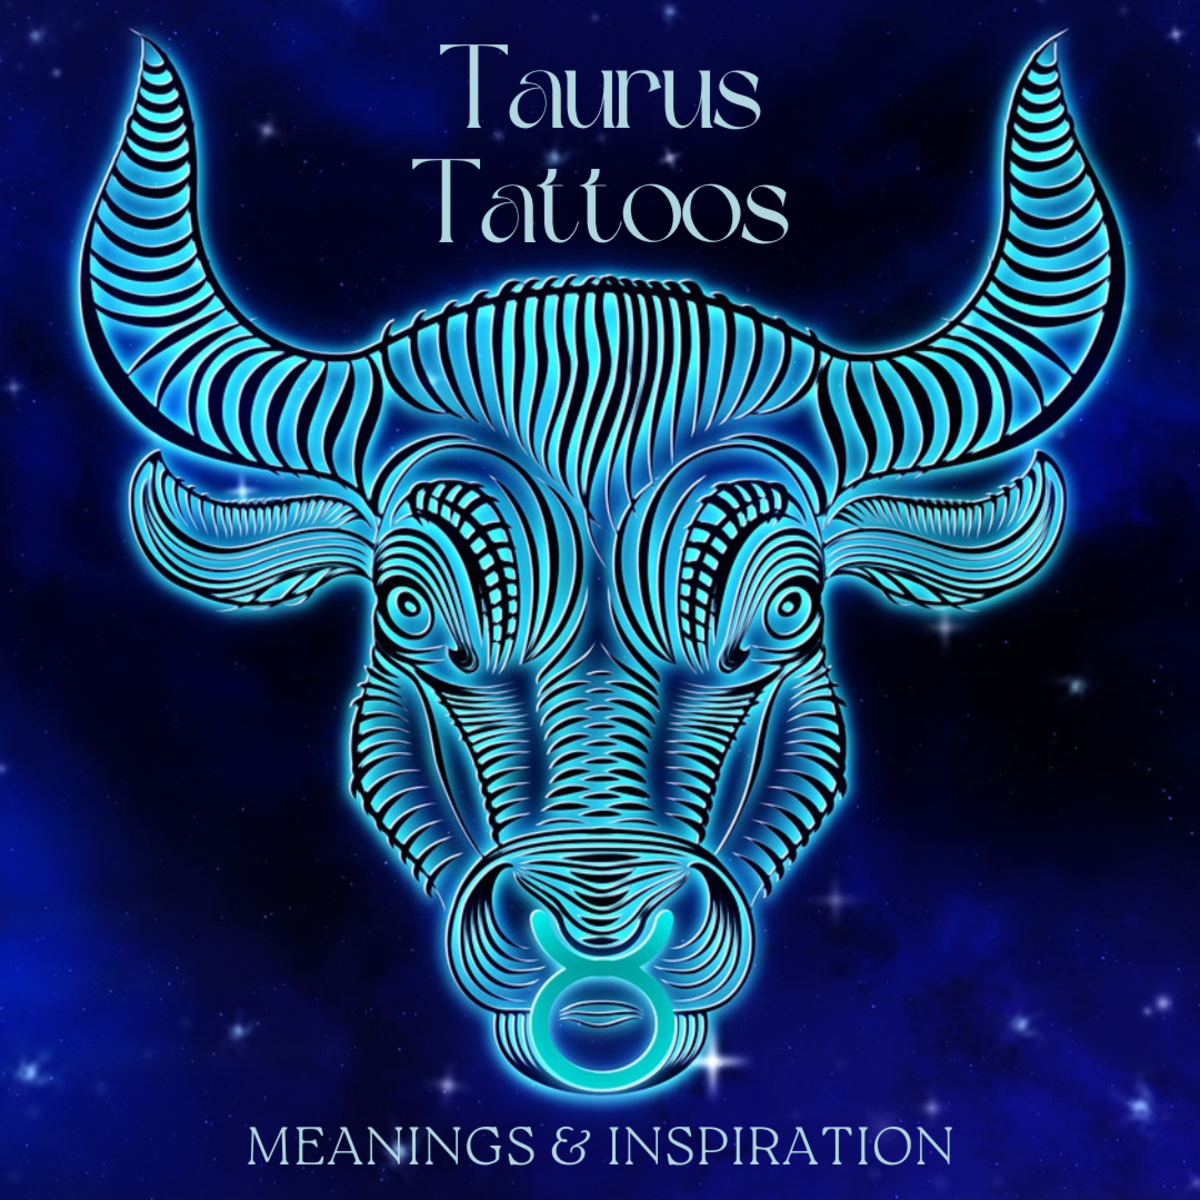 This article will provide lots of meaning interpretation and inspirational ideas for those looking to get a Taurus tattoo.